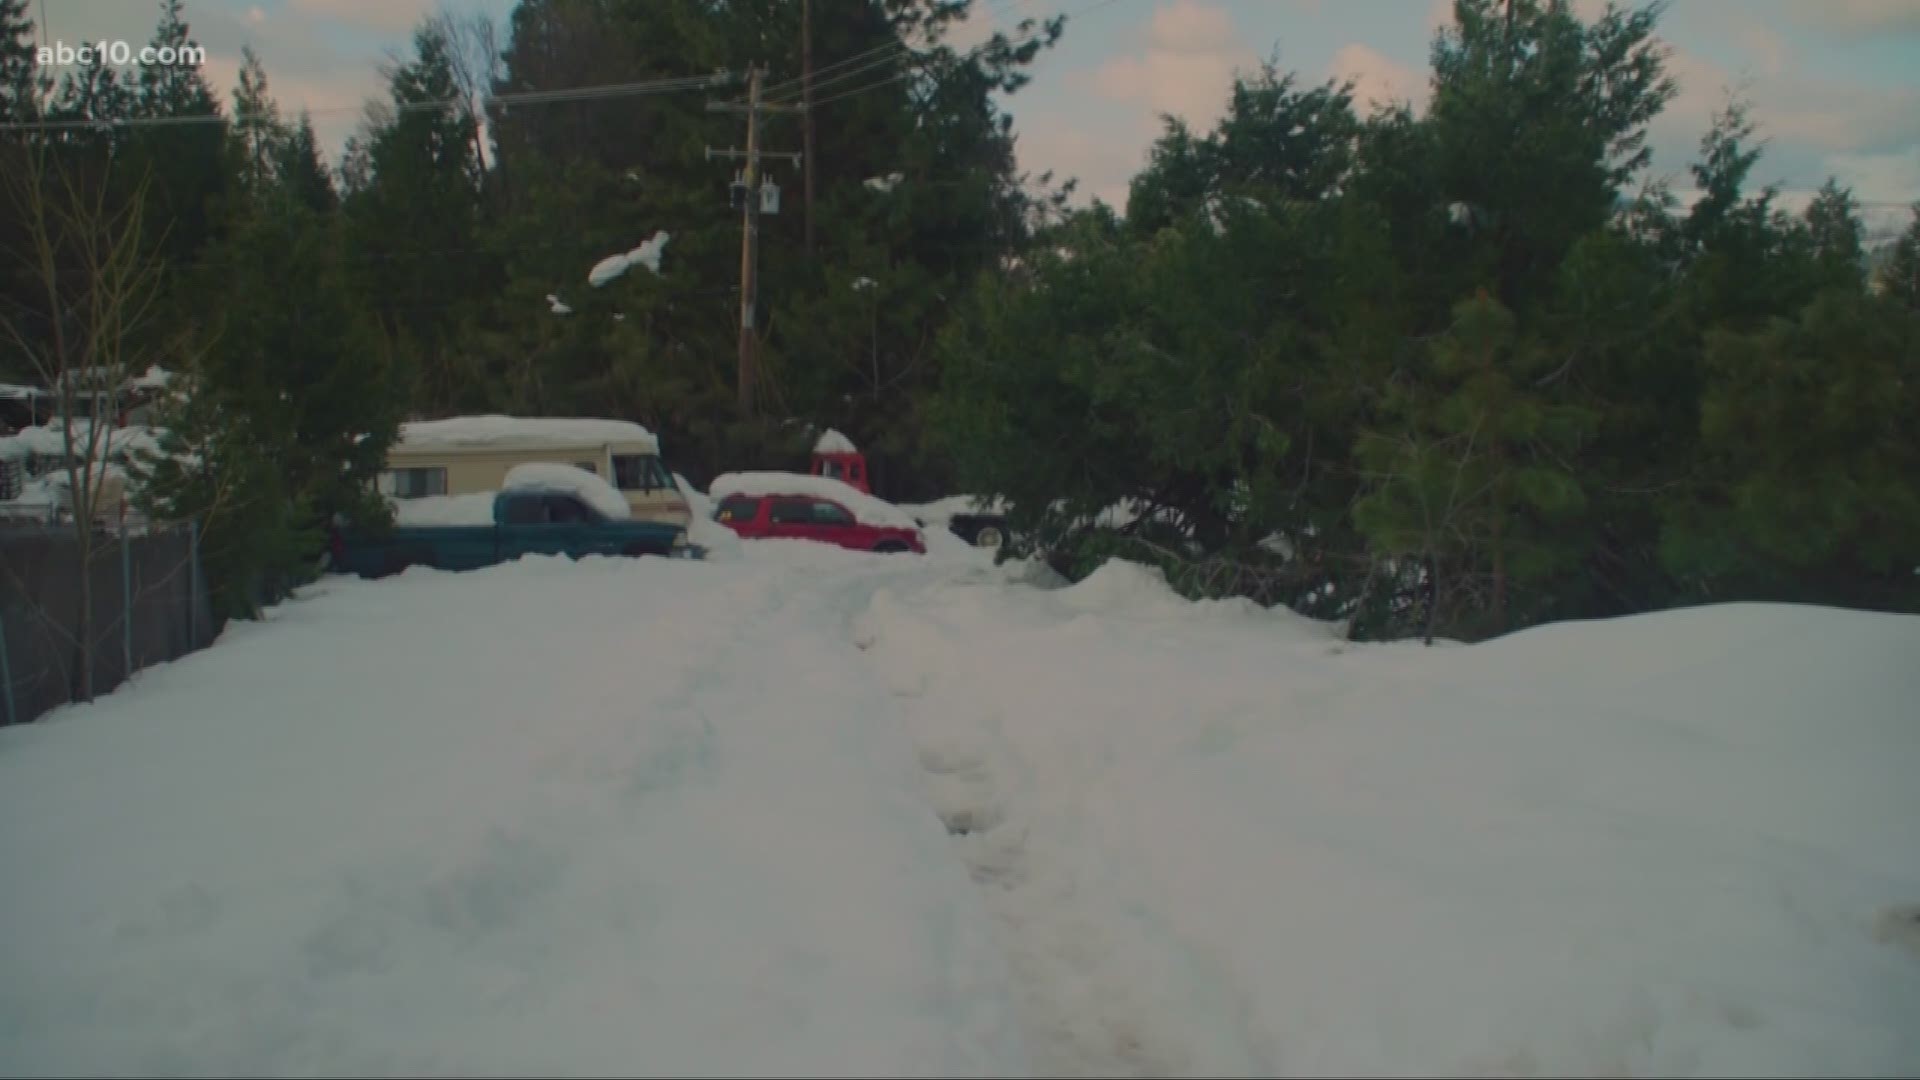 The Sierra and Foothills communities are fearing for a repeat prolonged power outage after a big snowstorm in mid-March.